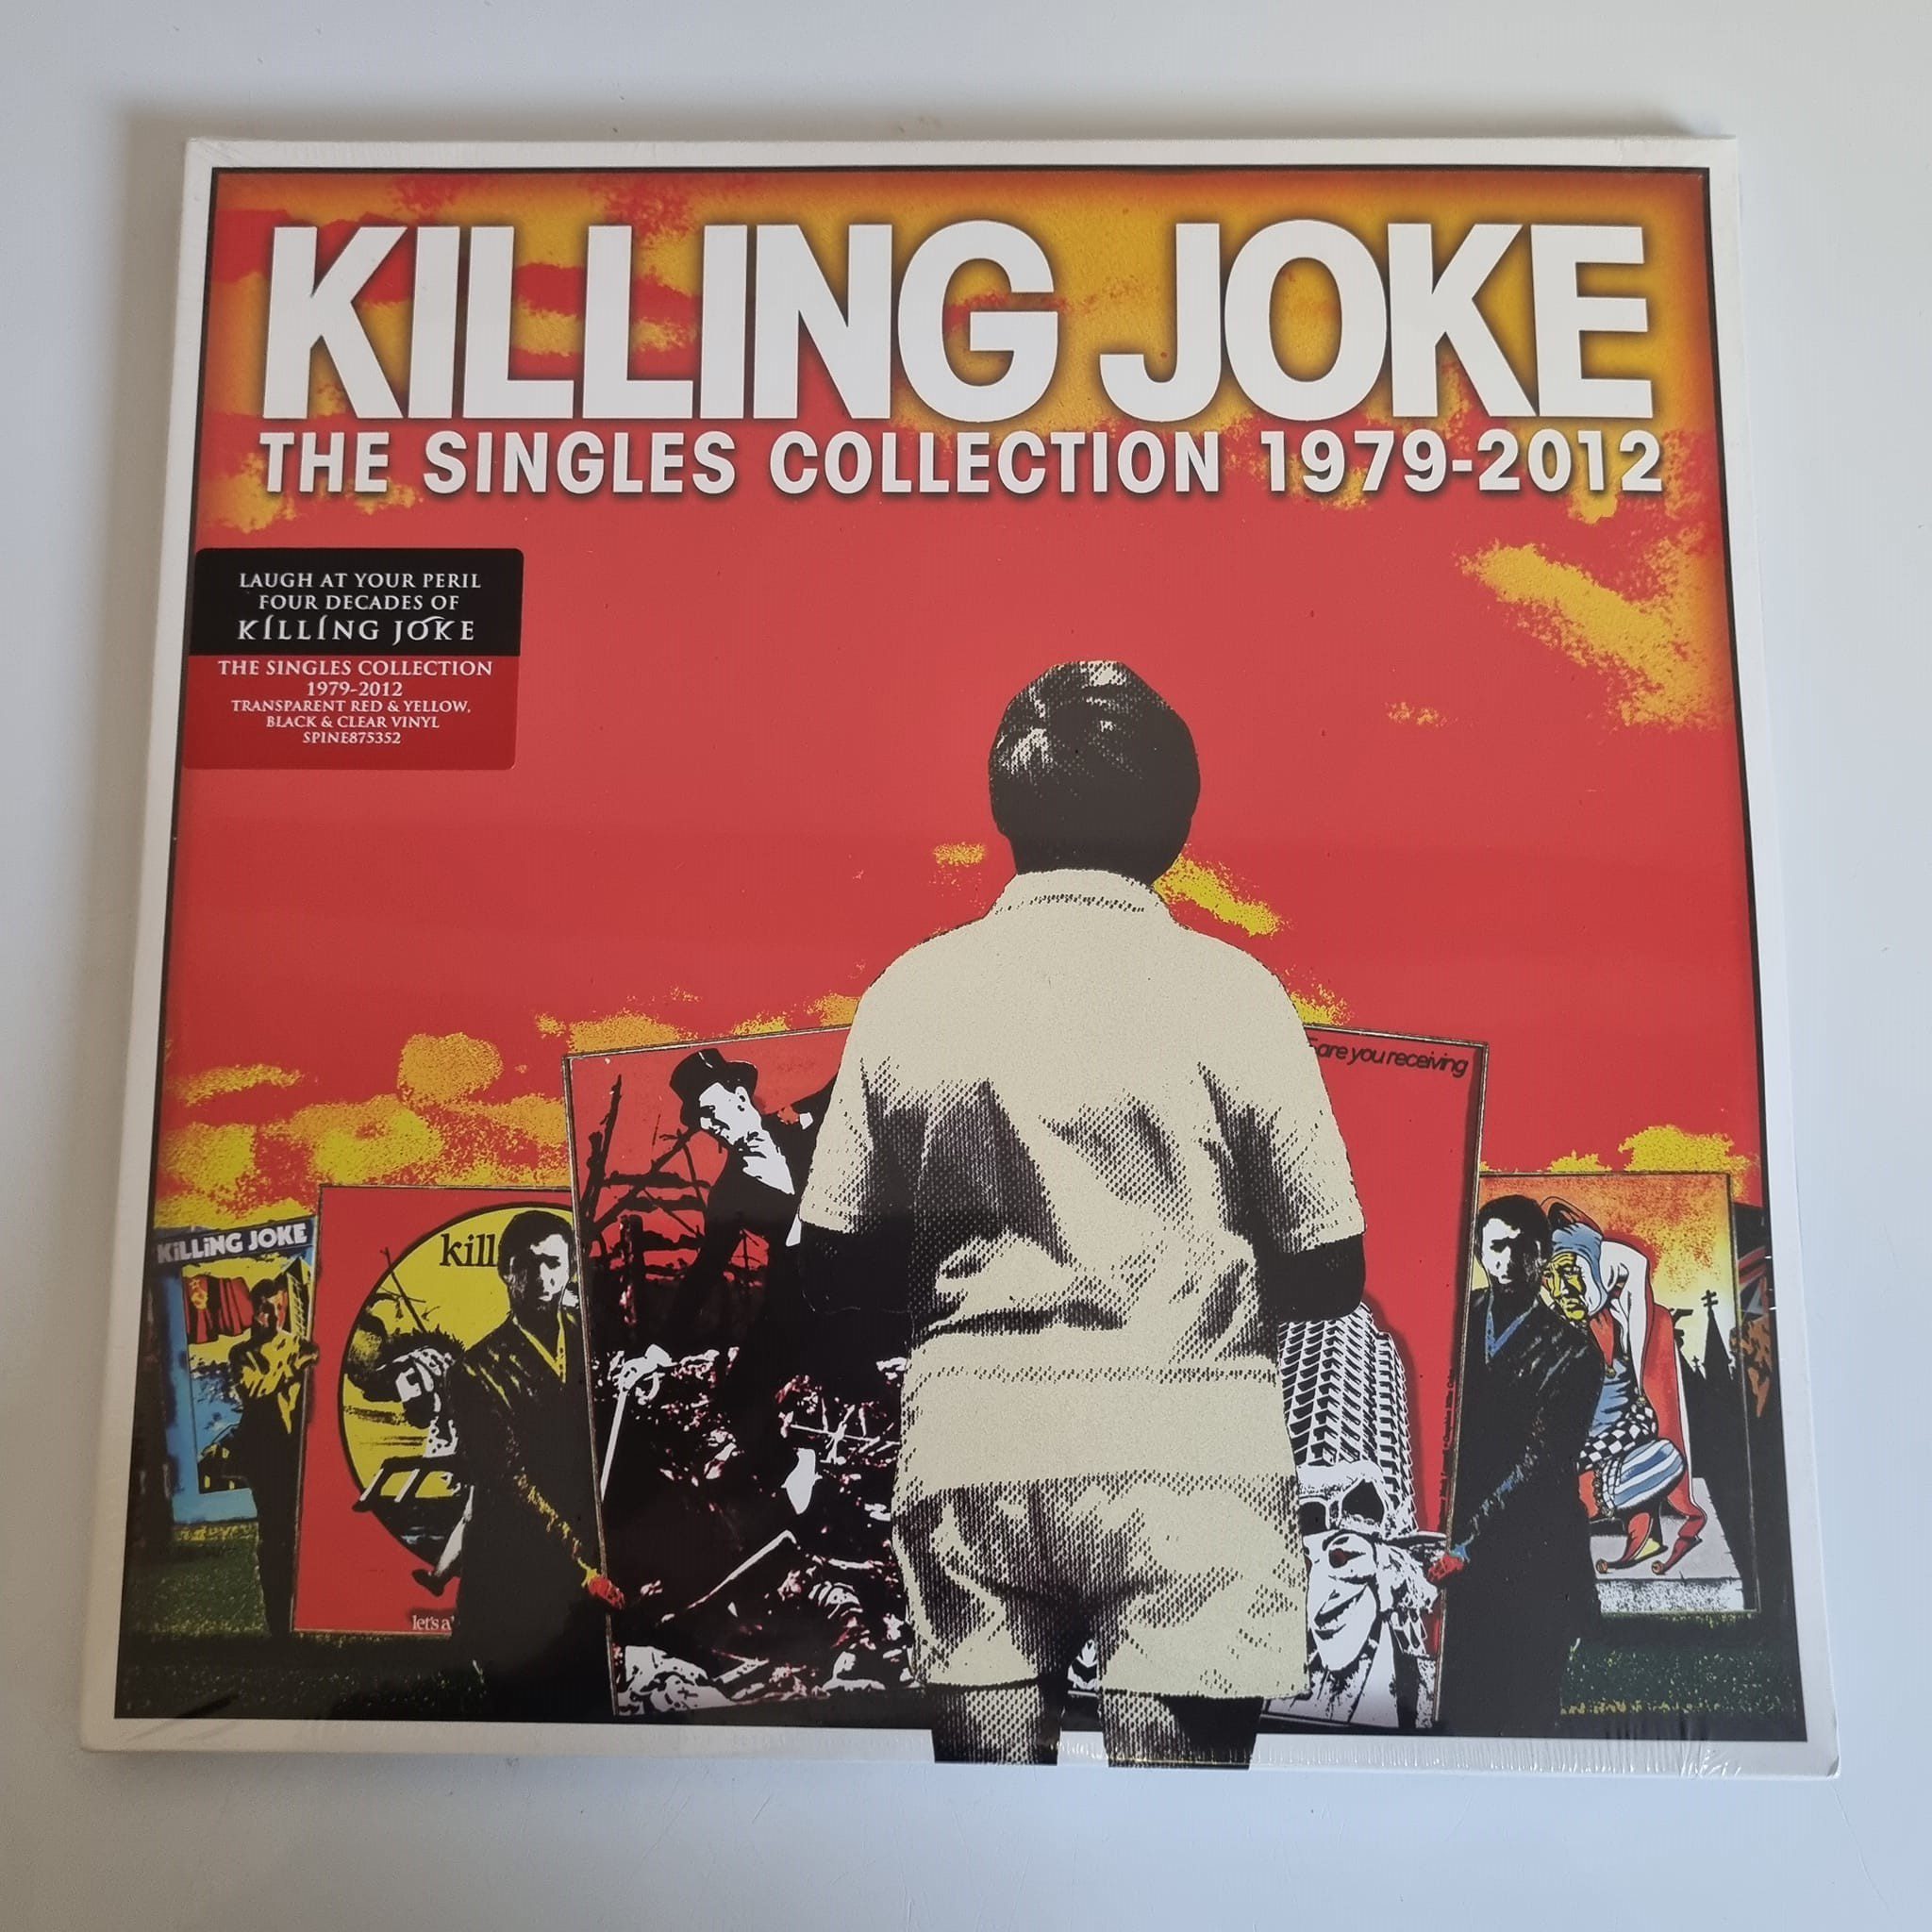 Buy this rare Killing Joke record by clicking here